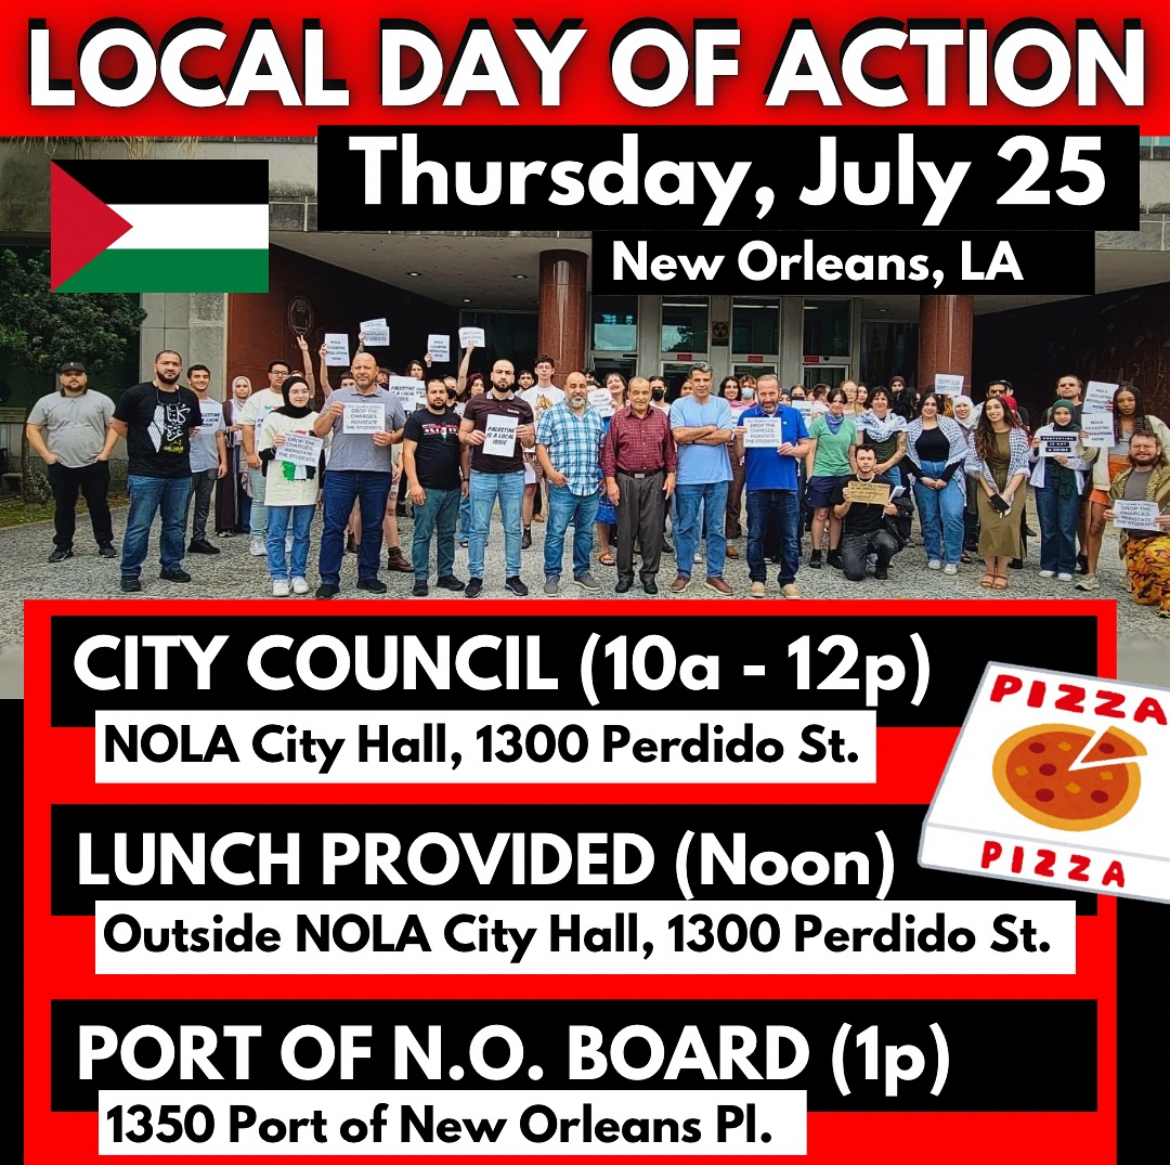 Post with text and image of pro-Palestine organizers outside City Hall. The text reads as follows: "Local day of action, thursday, july 25, New Orleans. City Council 10 am to 12 pm at NOLA City Hall. Lunch provided at noon outside NOLA City Hall. Port of New Orleans Board at 1 pm at 1350 Port of New Orleans Place.